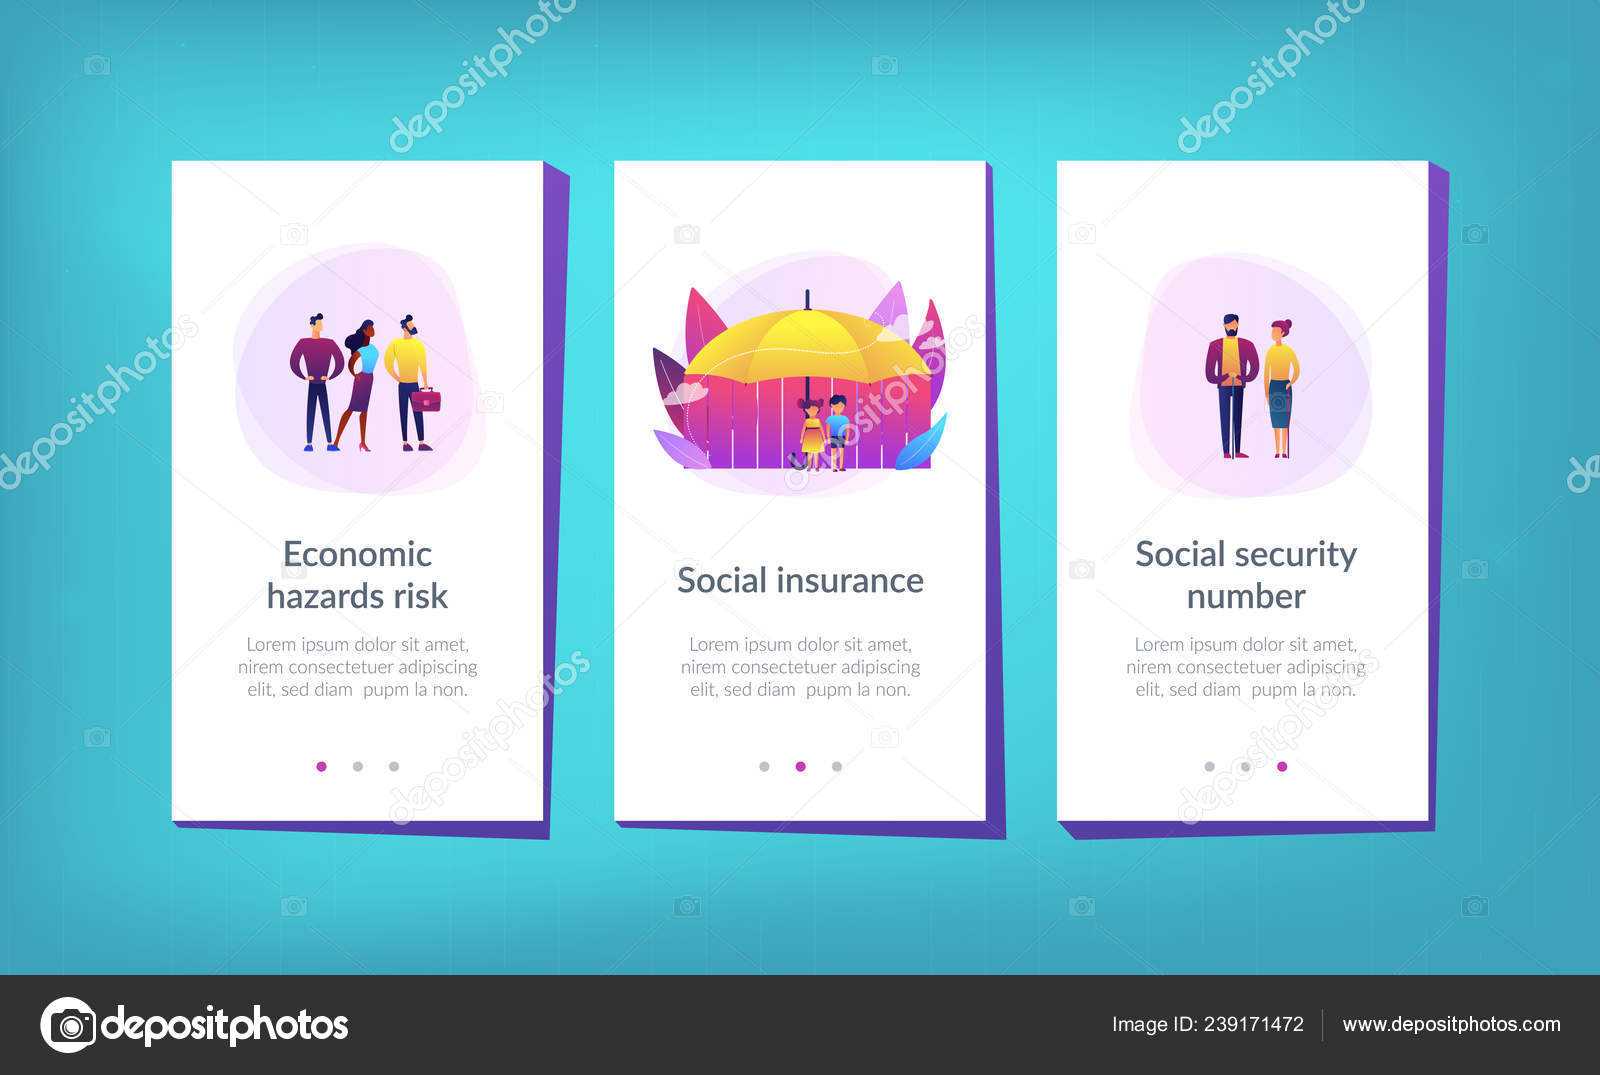 Blank Social Security Card Template | Social Insurance App Throughout Blank Social Security Card Template Download